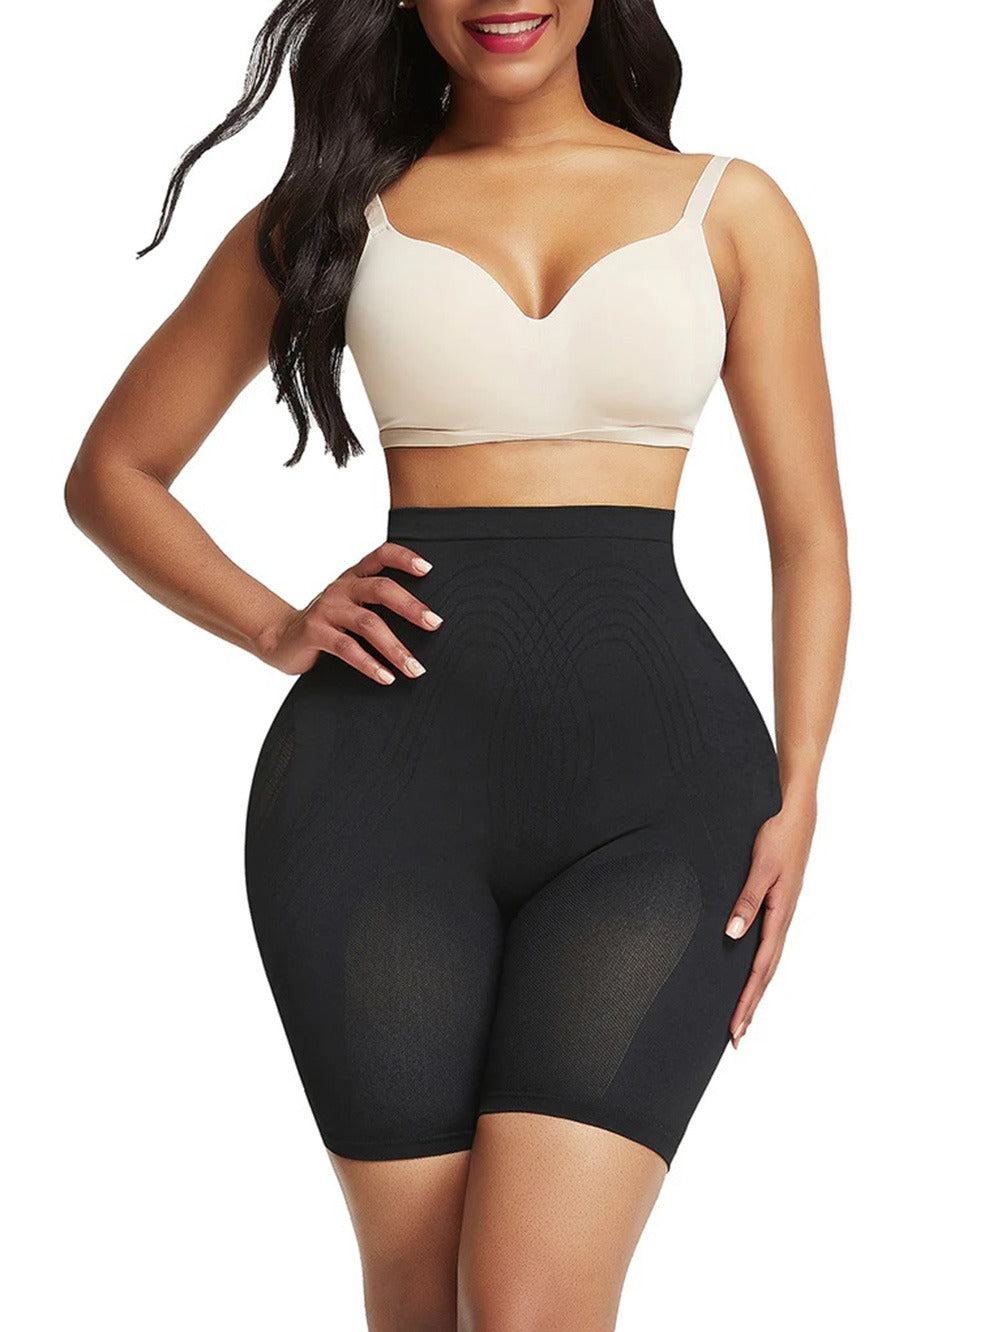 MT 200093 High-waist shorts to tighten the tummy and highlight the buttocks - black color